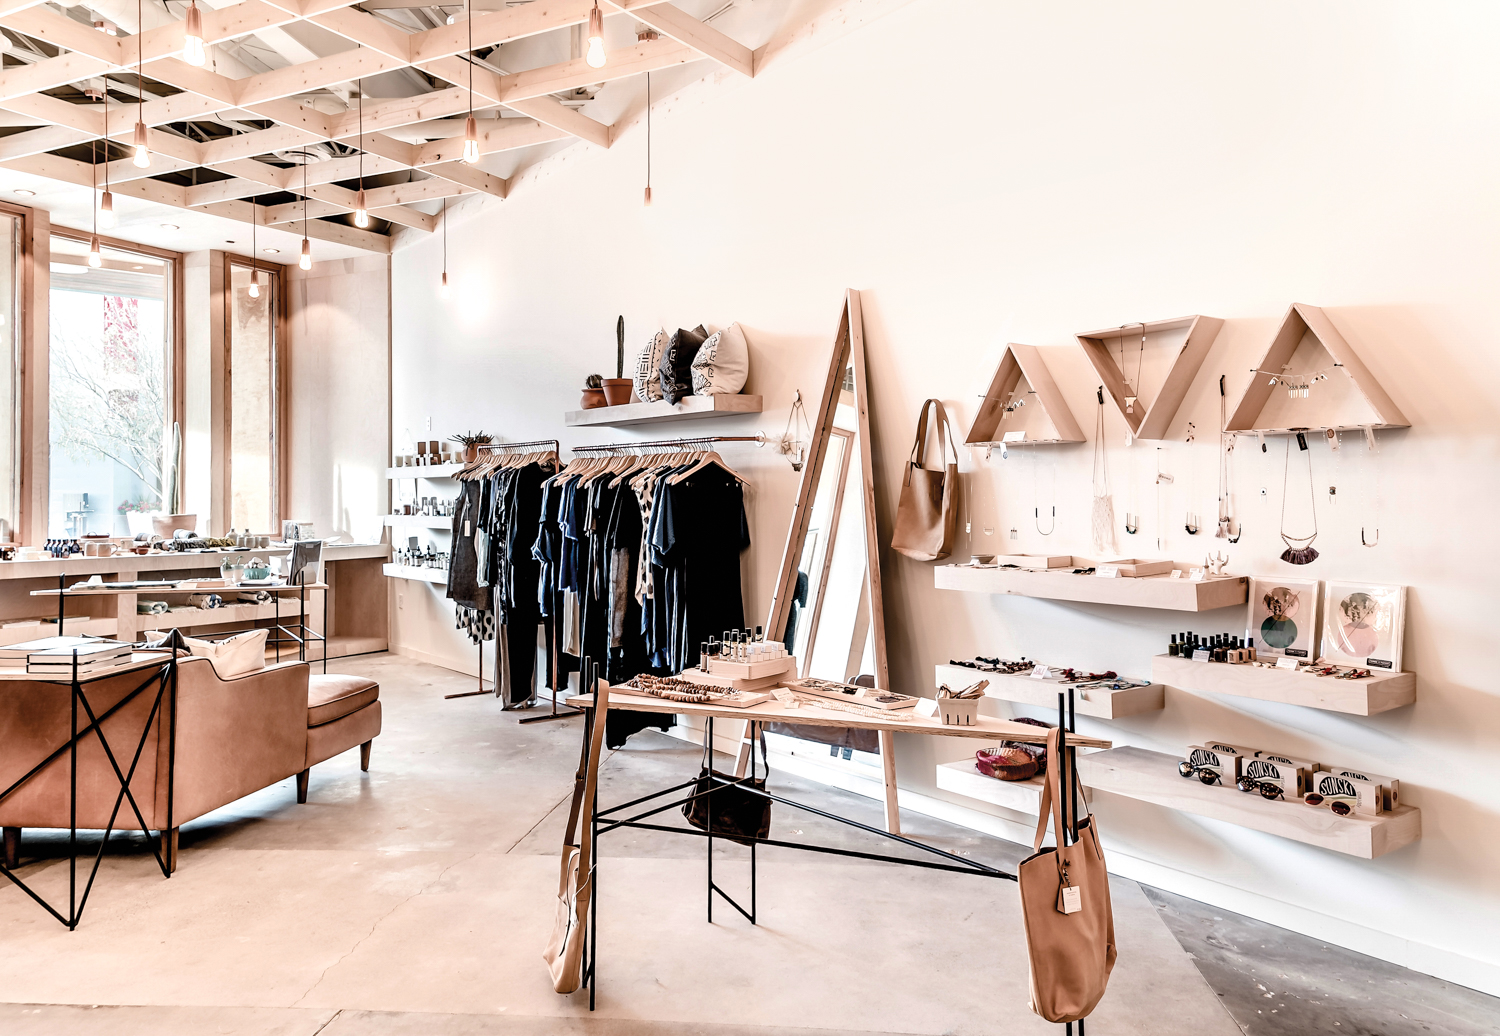 Boutique with light wood ceilings and wood shelves displaying jewelry, clothes and other accessories.